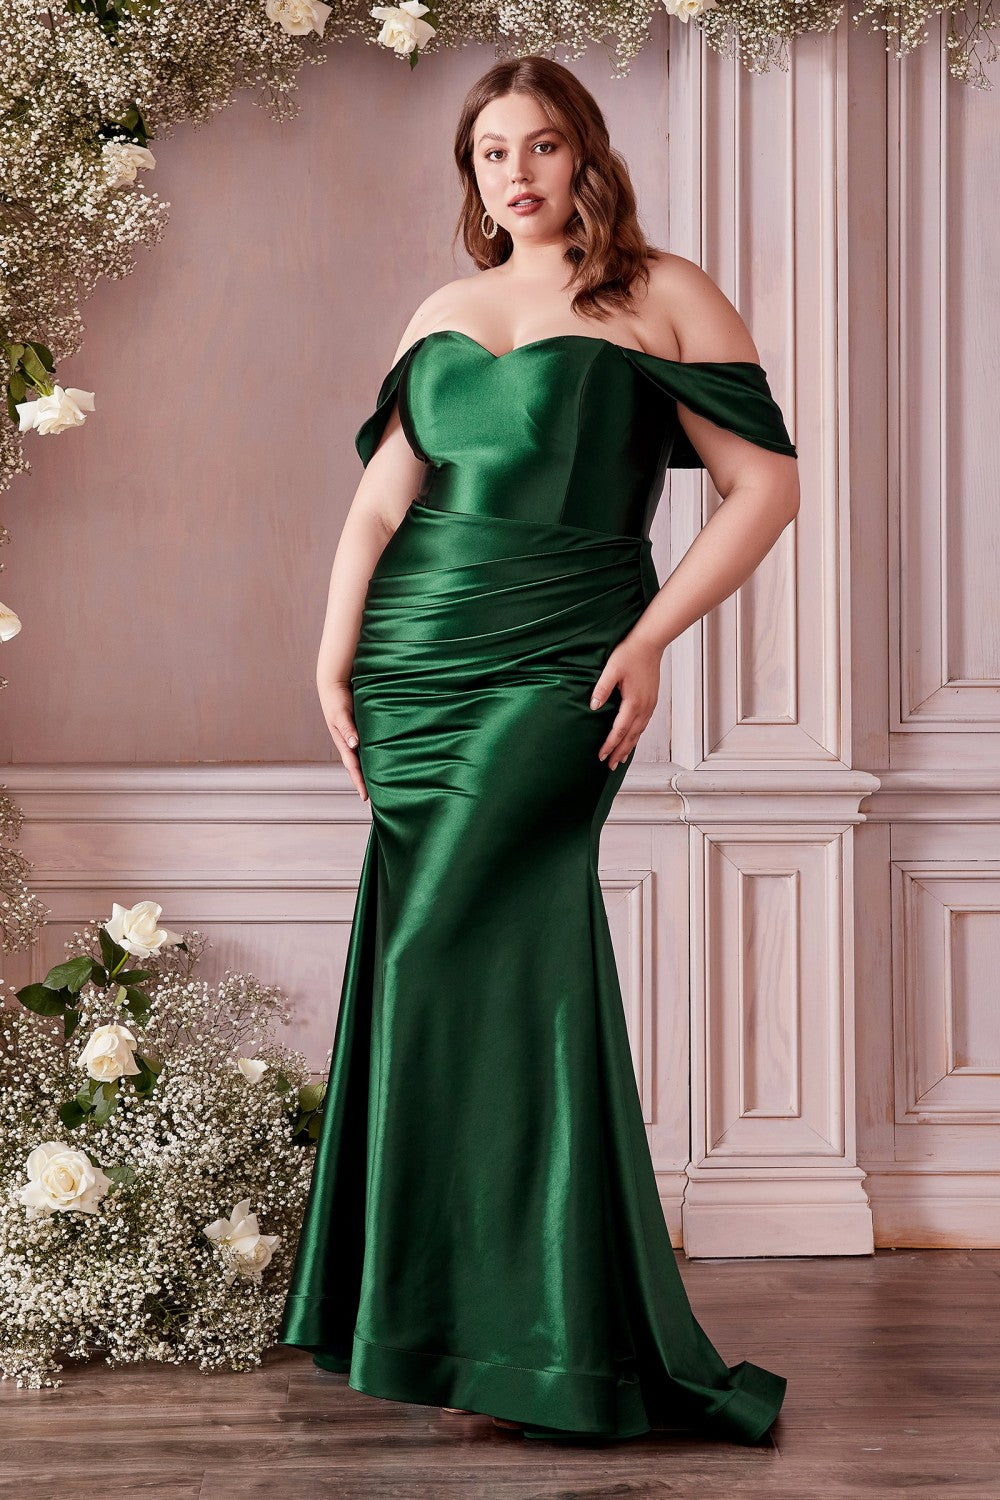 Satin Strapless Fitted Gown Classic Elegant Wrapped Bodice Off Shoulder Prom & Bridesmaid Dresses Plus Size Curve CDCH163C Elsy Style Bridesmaid Dress